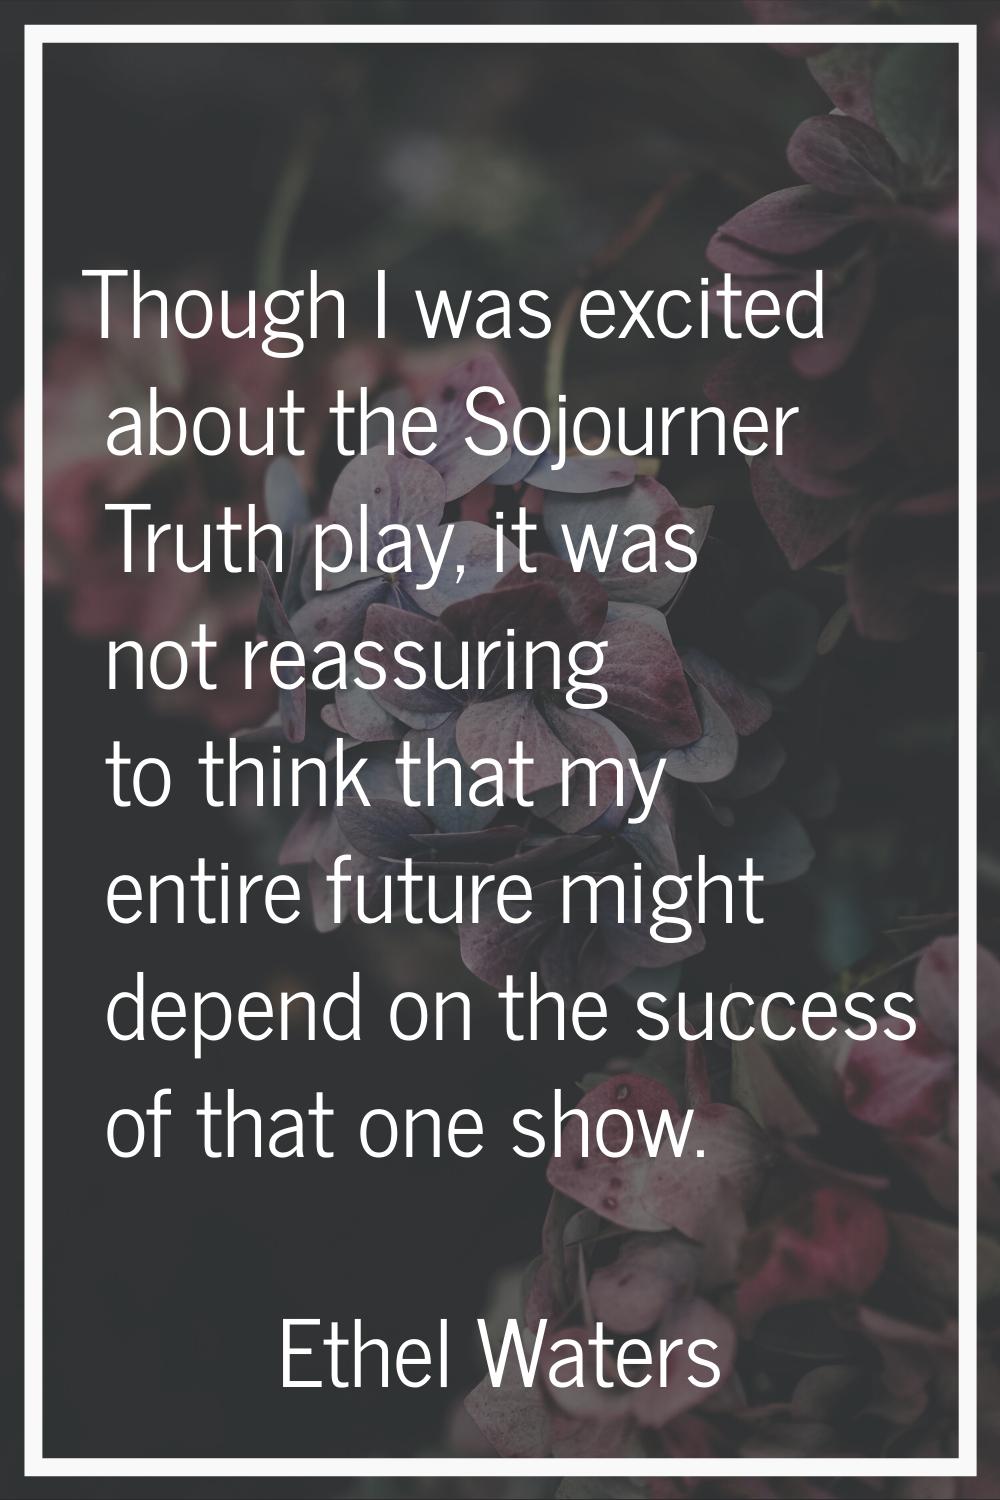 Though I was excited about the Sojourner Truth play, it was not reassuring to think that my entire 